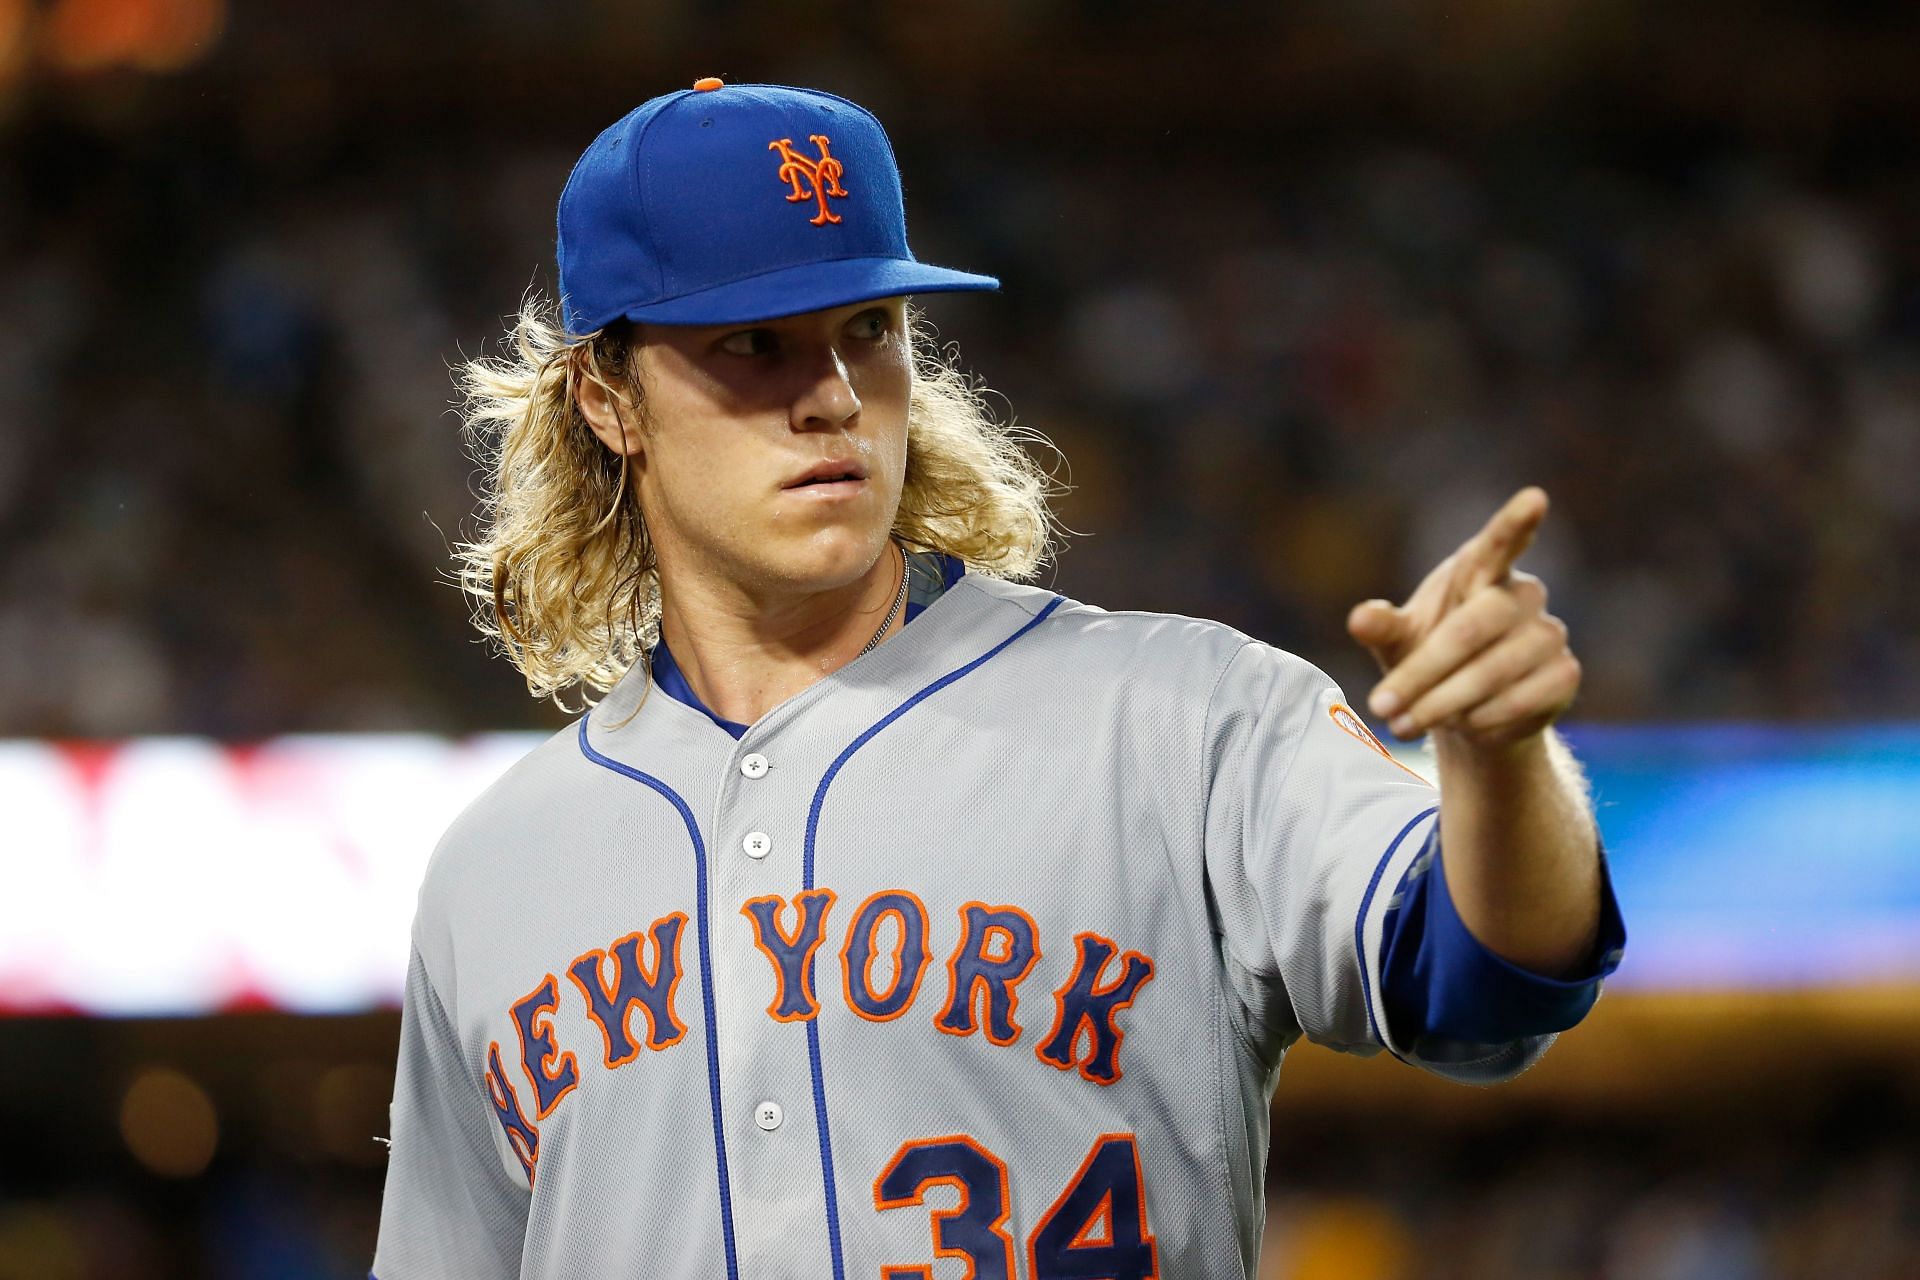 Noah Syndergaard pitched for the New York Mets from 2015-2021. He now pitches for the Los Angeles Angels.